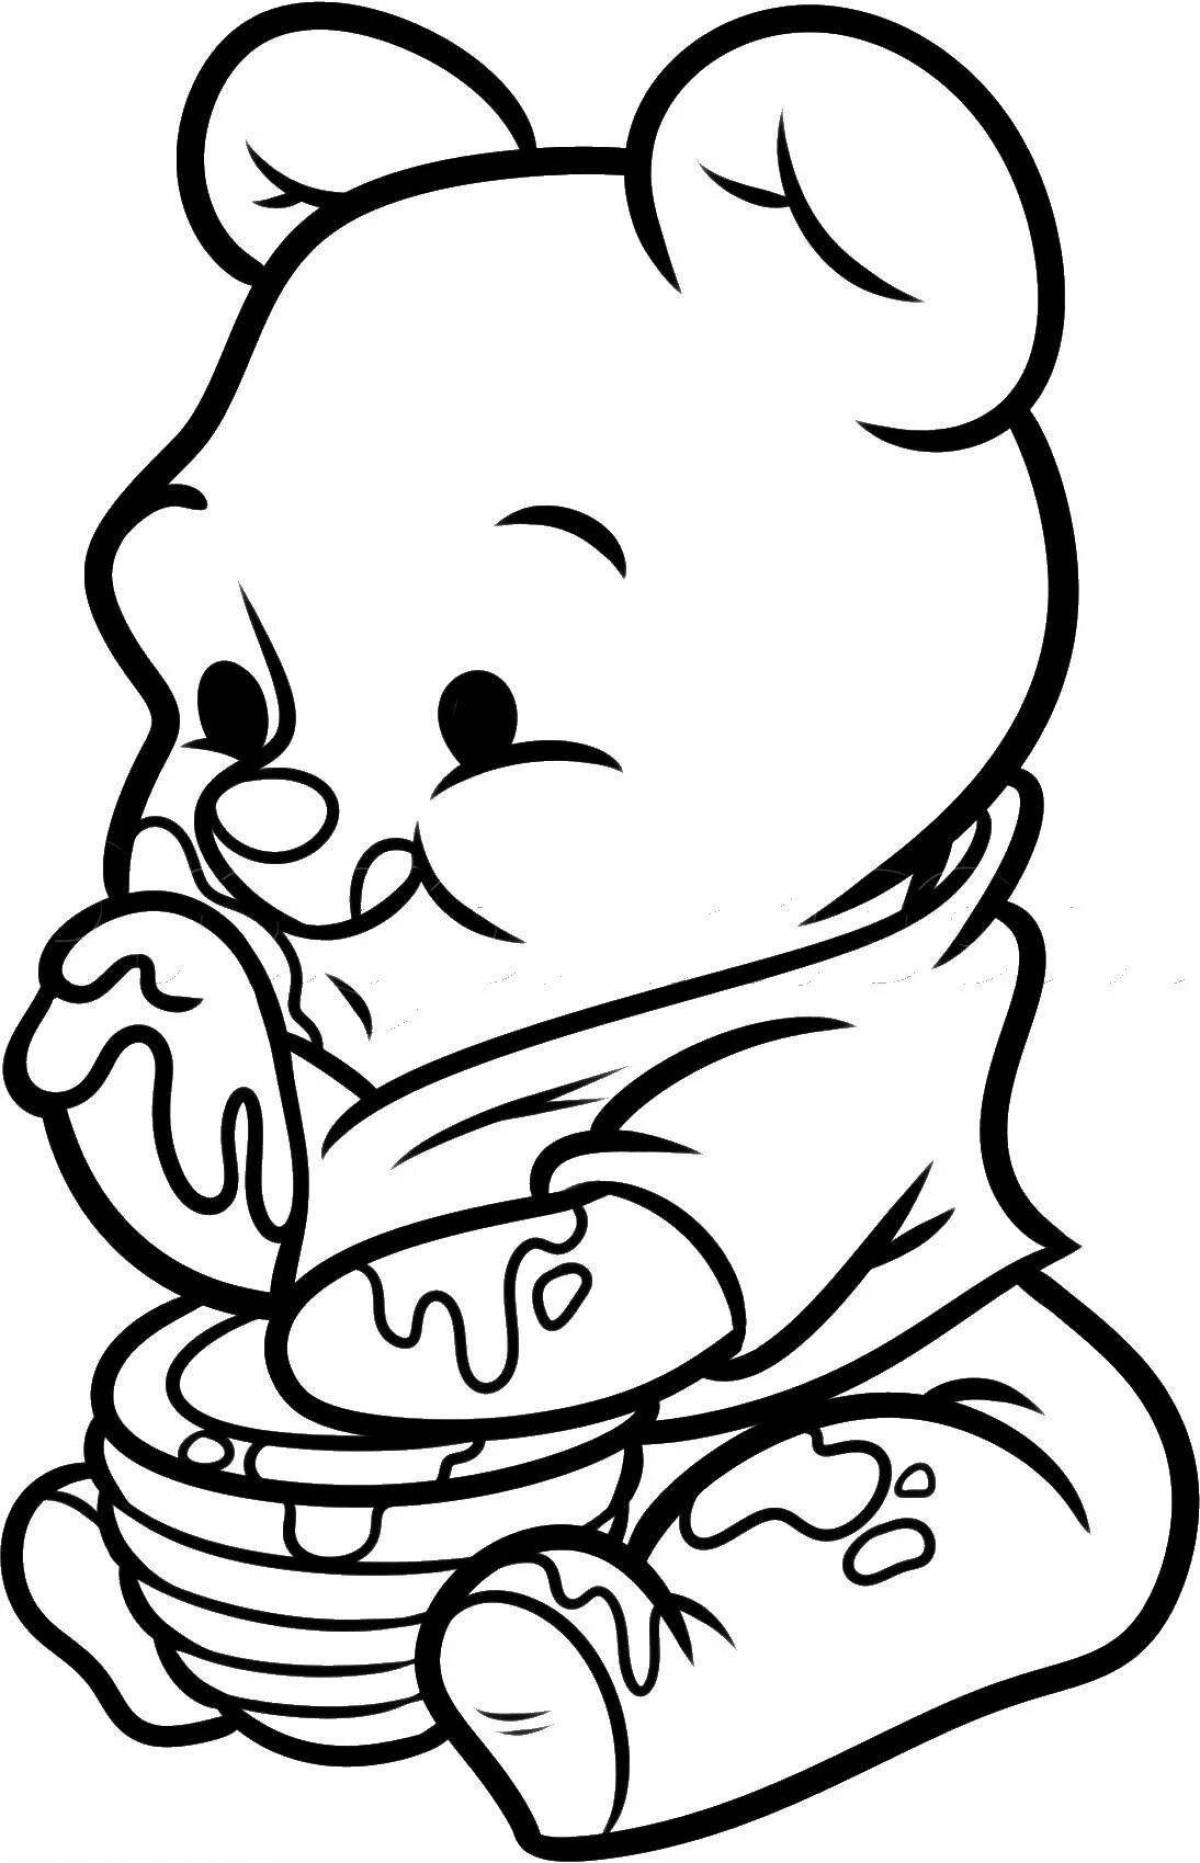 Cute and cozy teddy bear coloring book